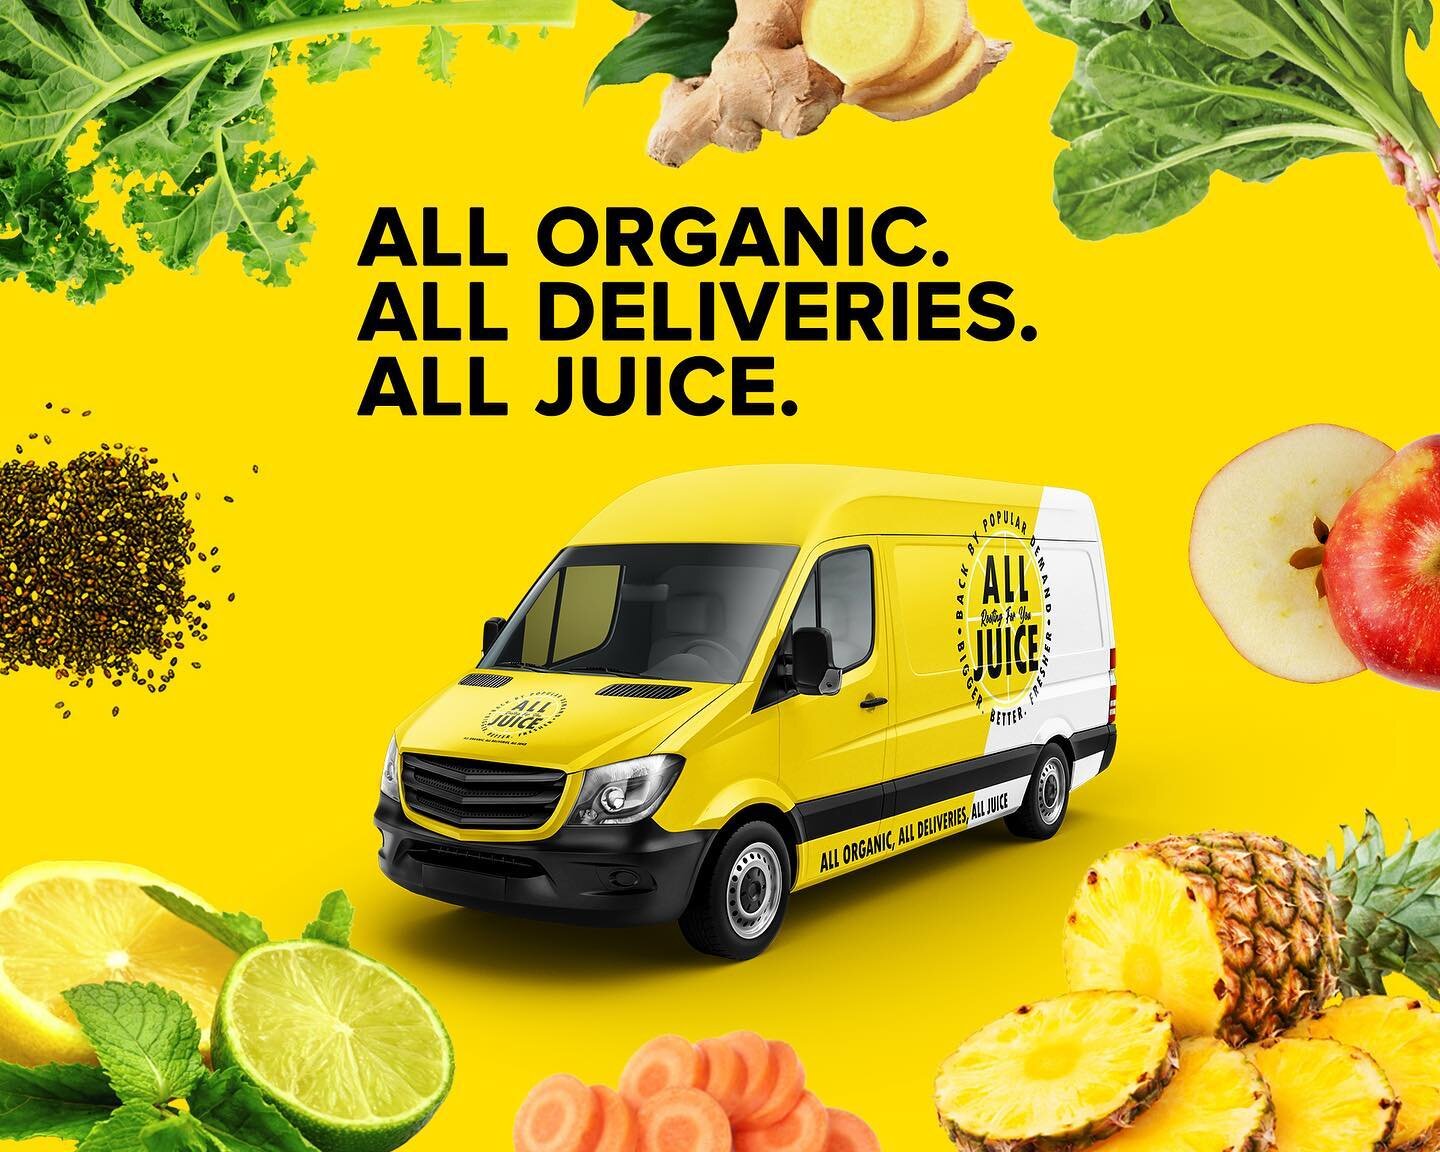 ALL JUICE WILL BE BACK and BETTER THAN EVER delivering JUICE again very soon! 

We have teamed up with another Local Family Business to be able to service all your juicing needs as before and NOW WE WILL BE ORGANIC!

We will keep you posted as soon a